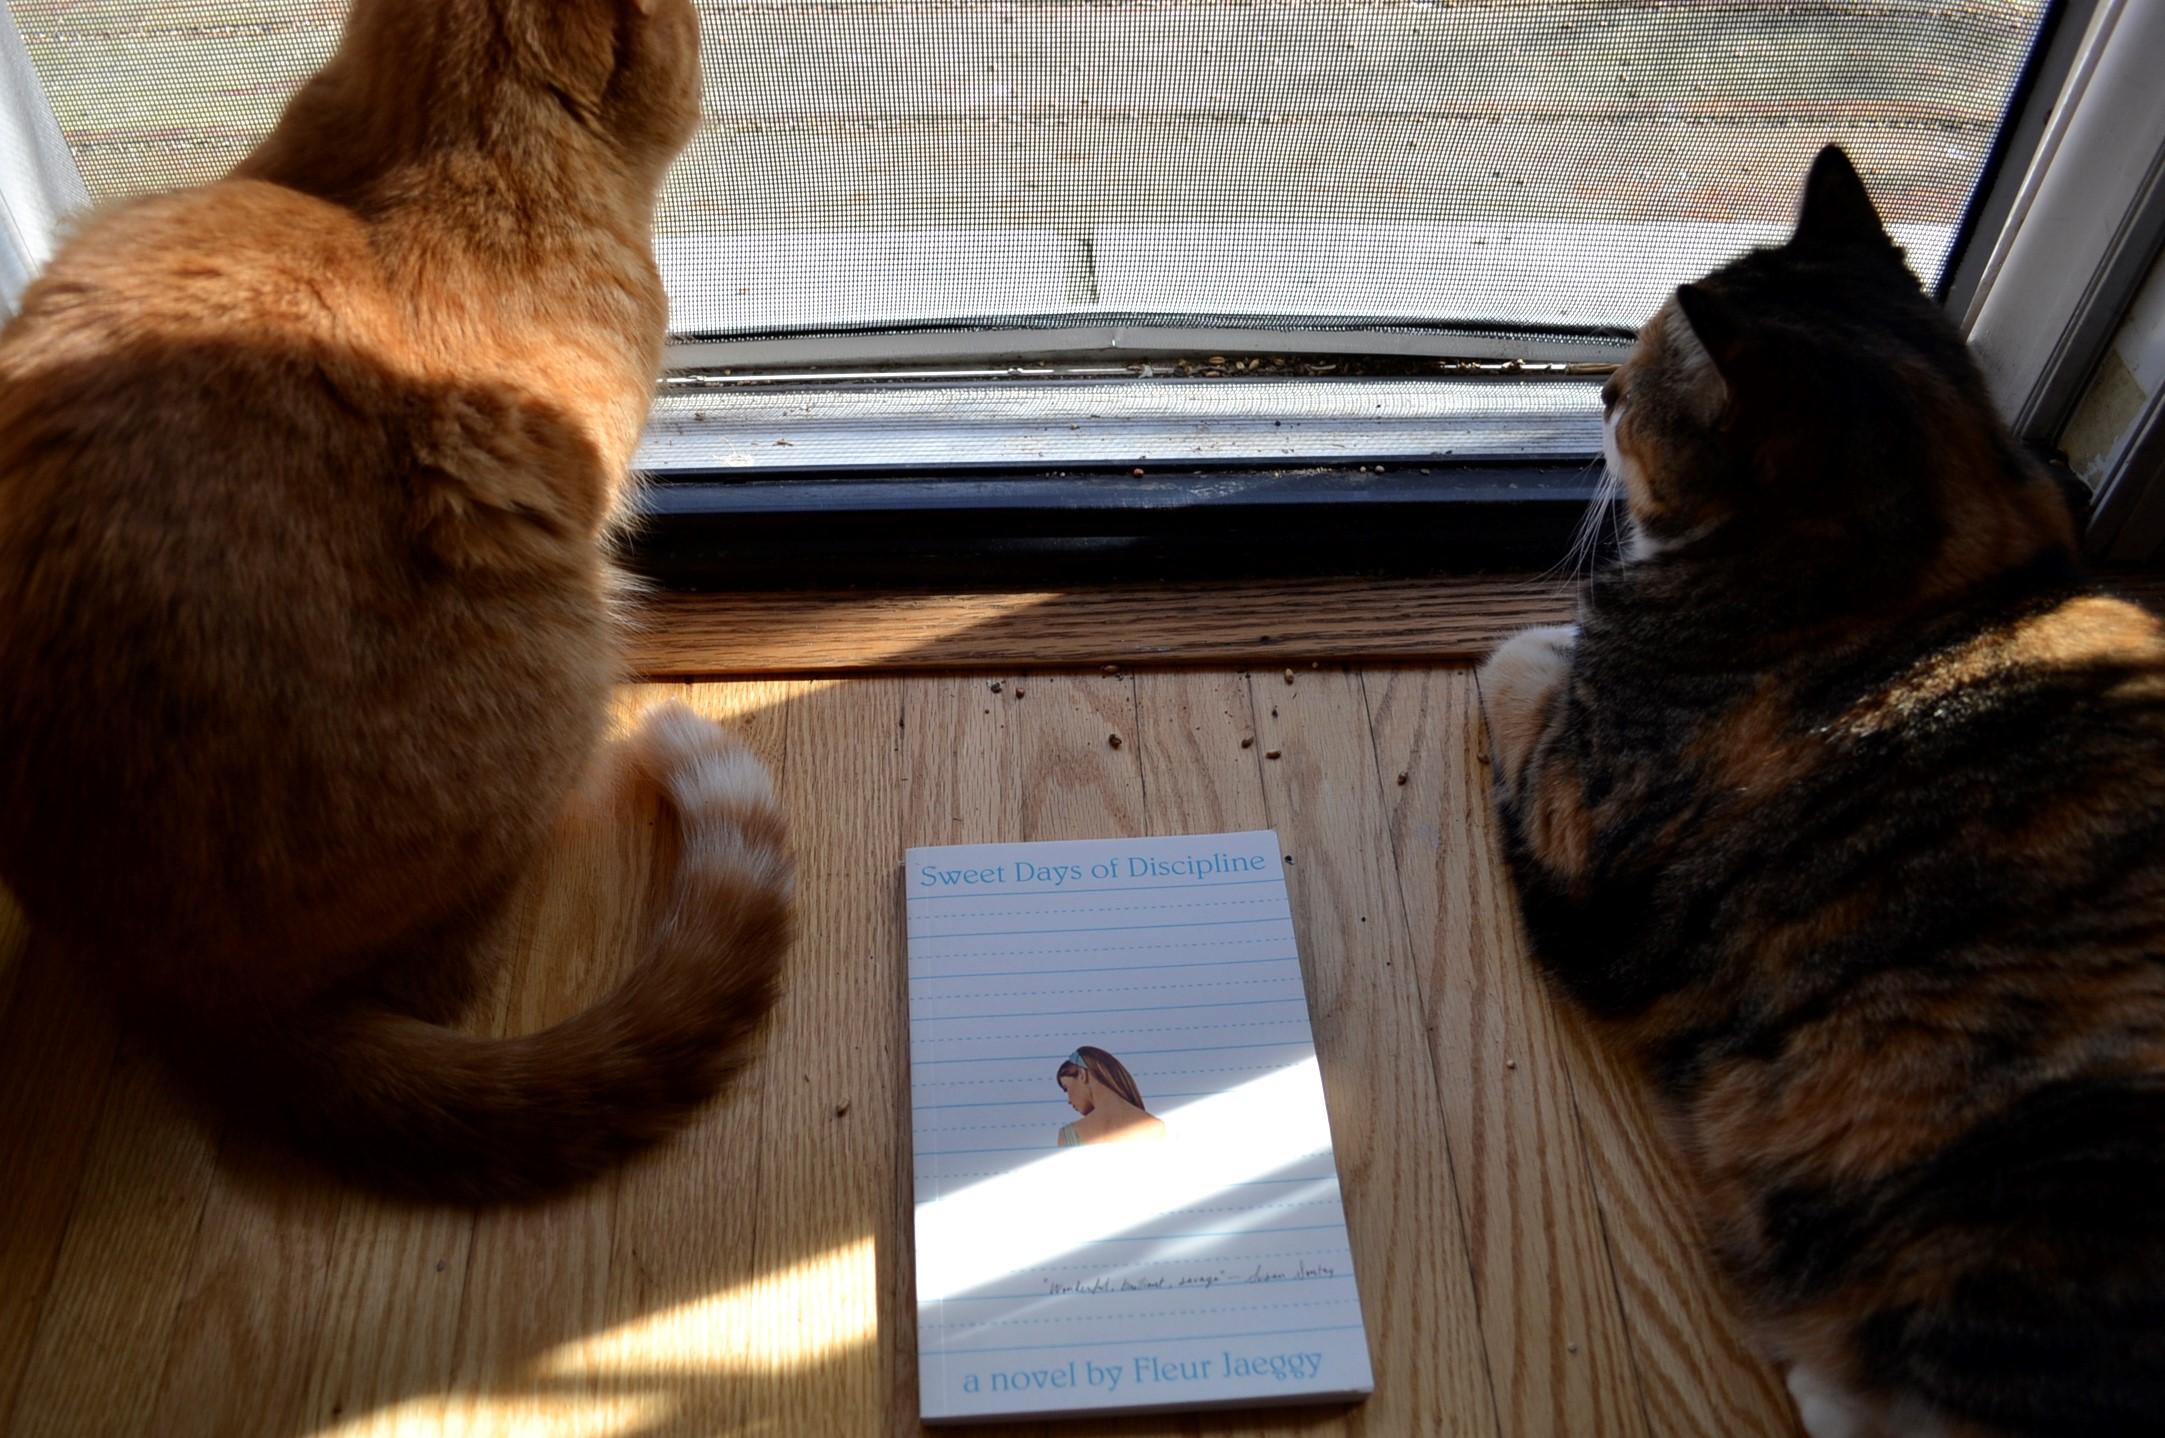 An orange cat and a calico tabby sit on either side of Sweet Days of Discipline.